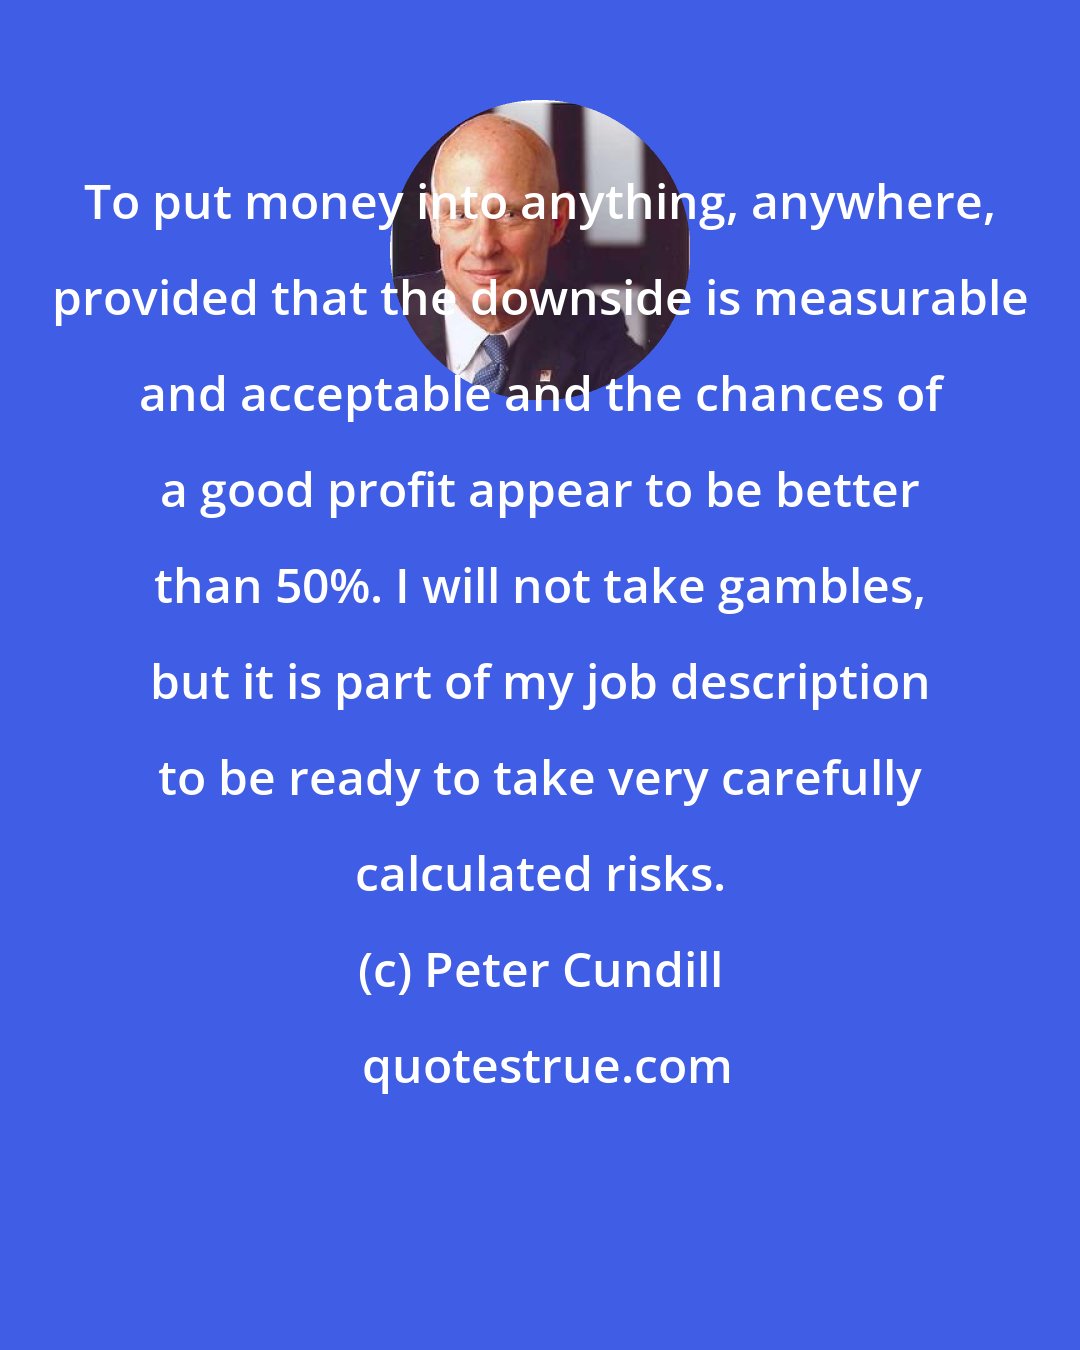 Peter Cundill: To put money into anything, anywhere, provided that the downside is measurable and acceptable and the chances of a good profit appear to be better than 50%. I will not take gambles, but it is part of my job description to be ready to take very carefully calculated risks.